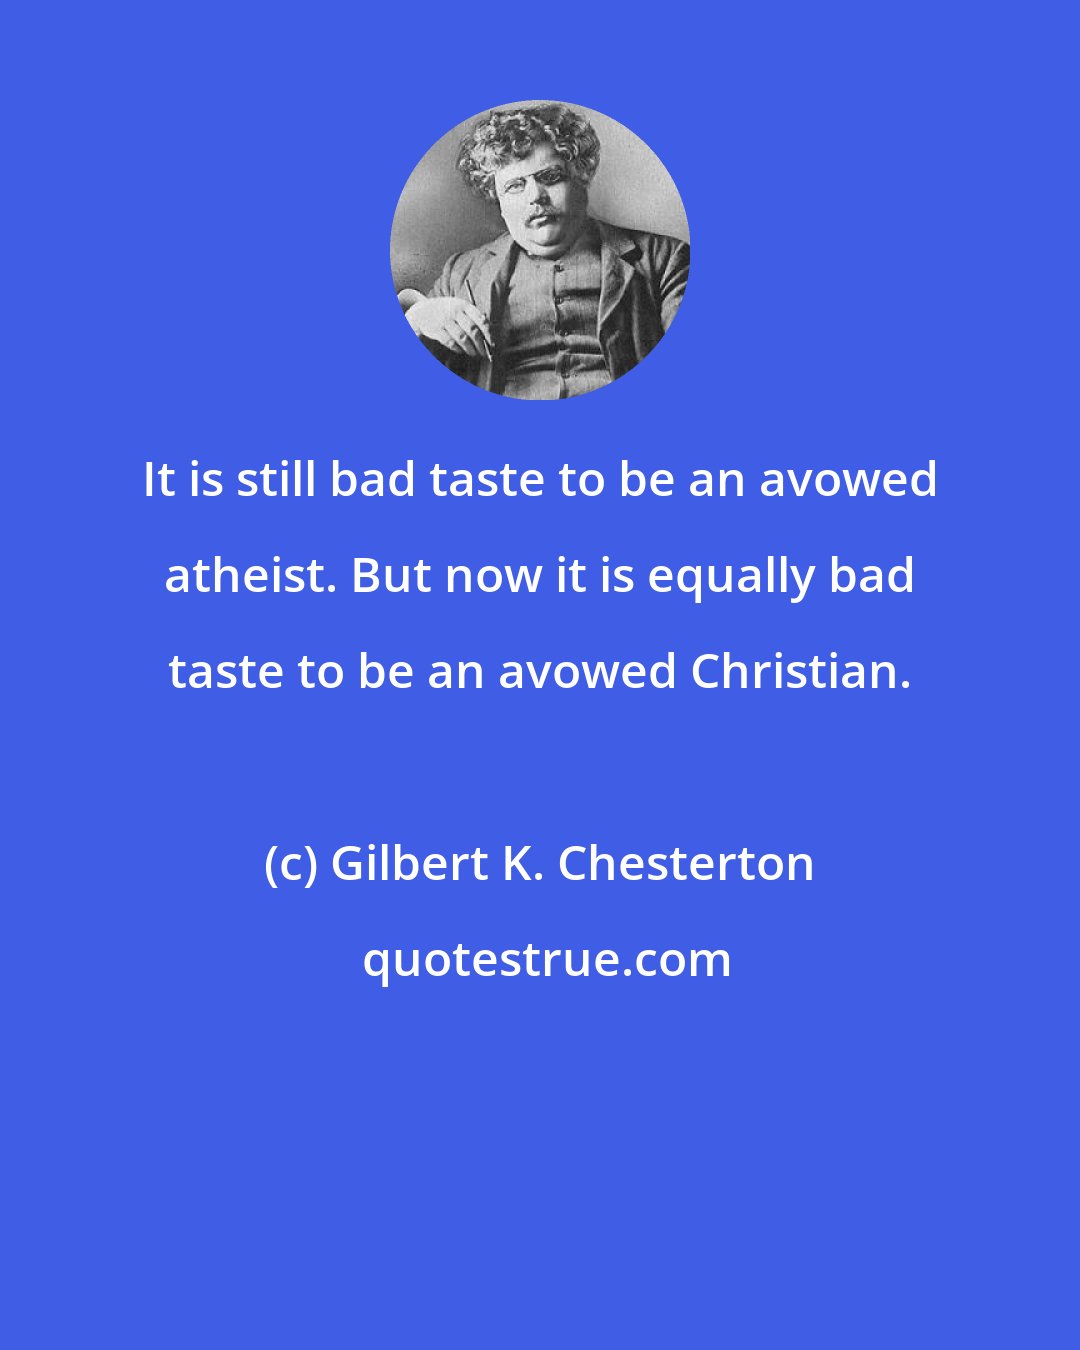 Gilbert K. Chesterton: It is still bad taste to be an avowed atheist. But now it is equally bad taste to be an avowed Christian.